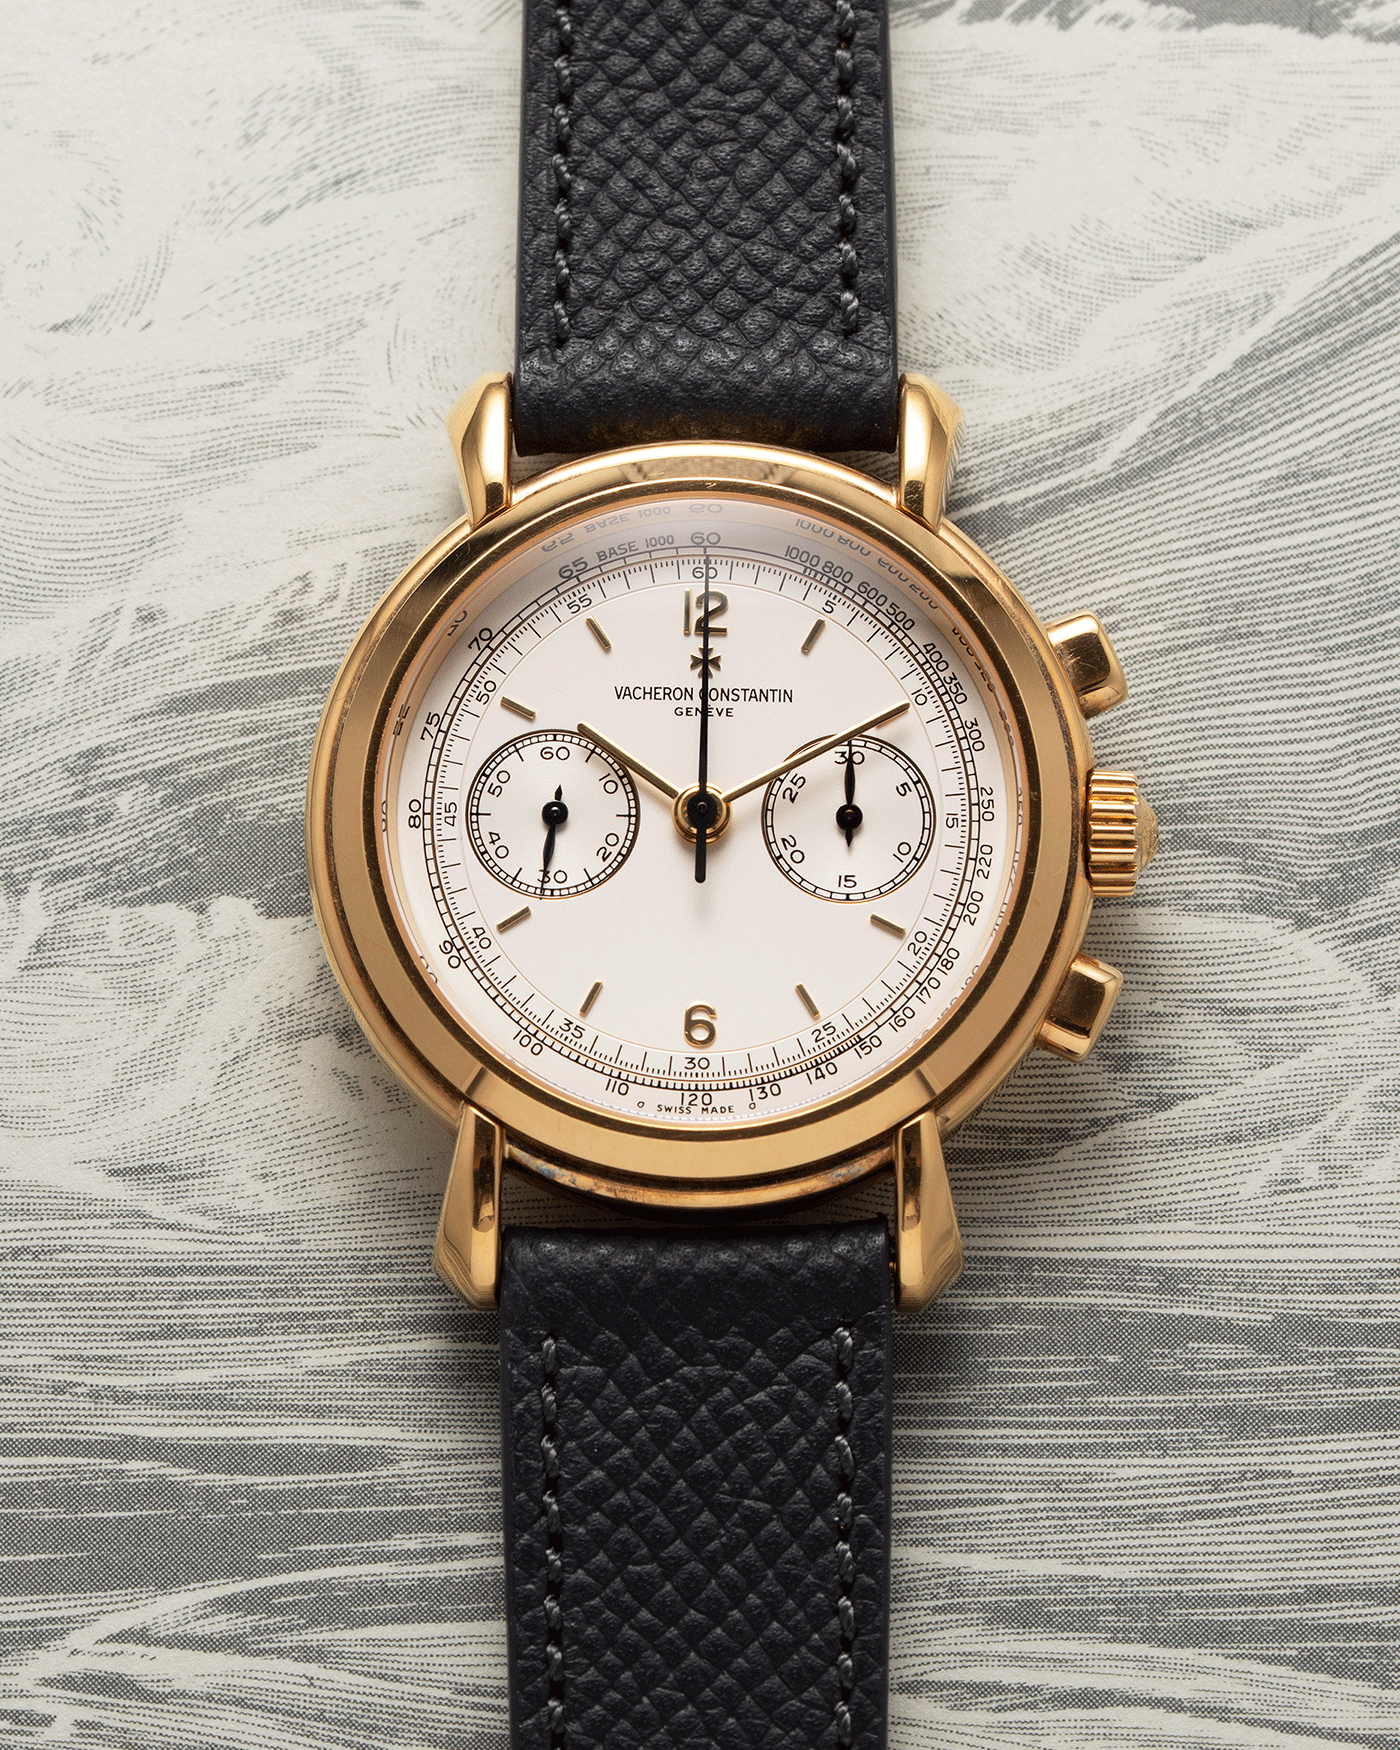 Brand: Vacheron Constantin Year: 1990’s Model: Les Historiques Chronograph Reference Number: 47101 Material: 18k Yellow Gold Movement: Lemania 2320 Based Cal. 1141 Case Diameter: 37mm Bracelet: Molequin Anthracite Textured Calf with 18k Yellow Gold Tang Buckle